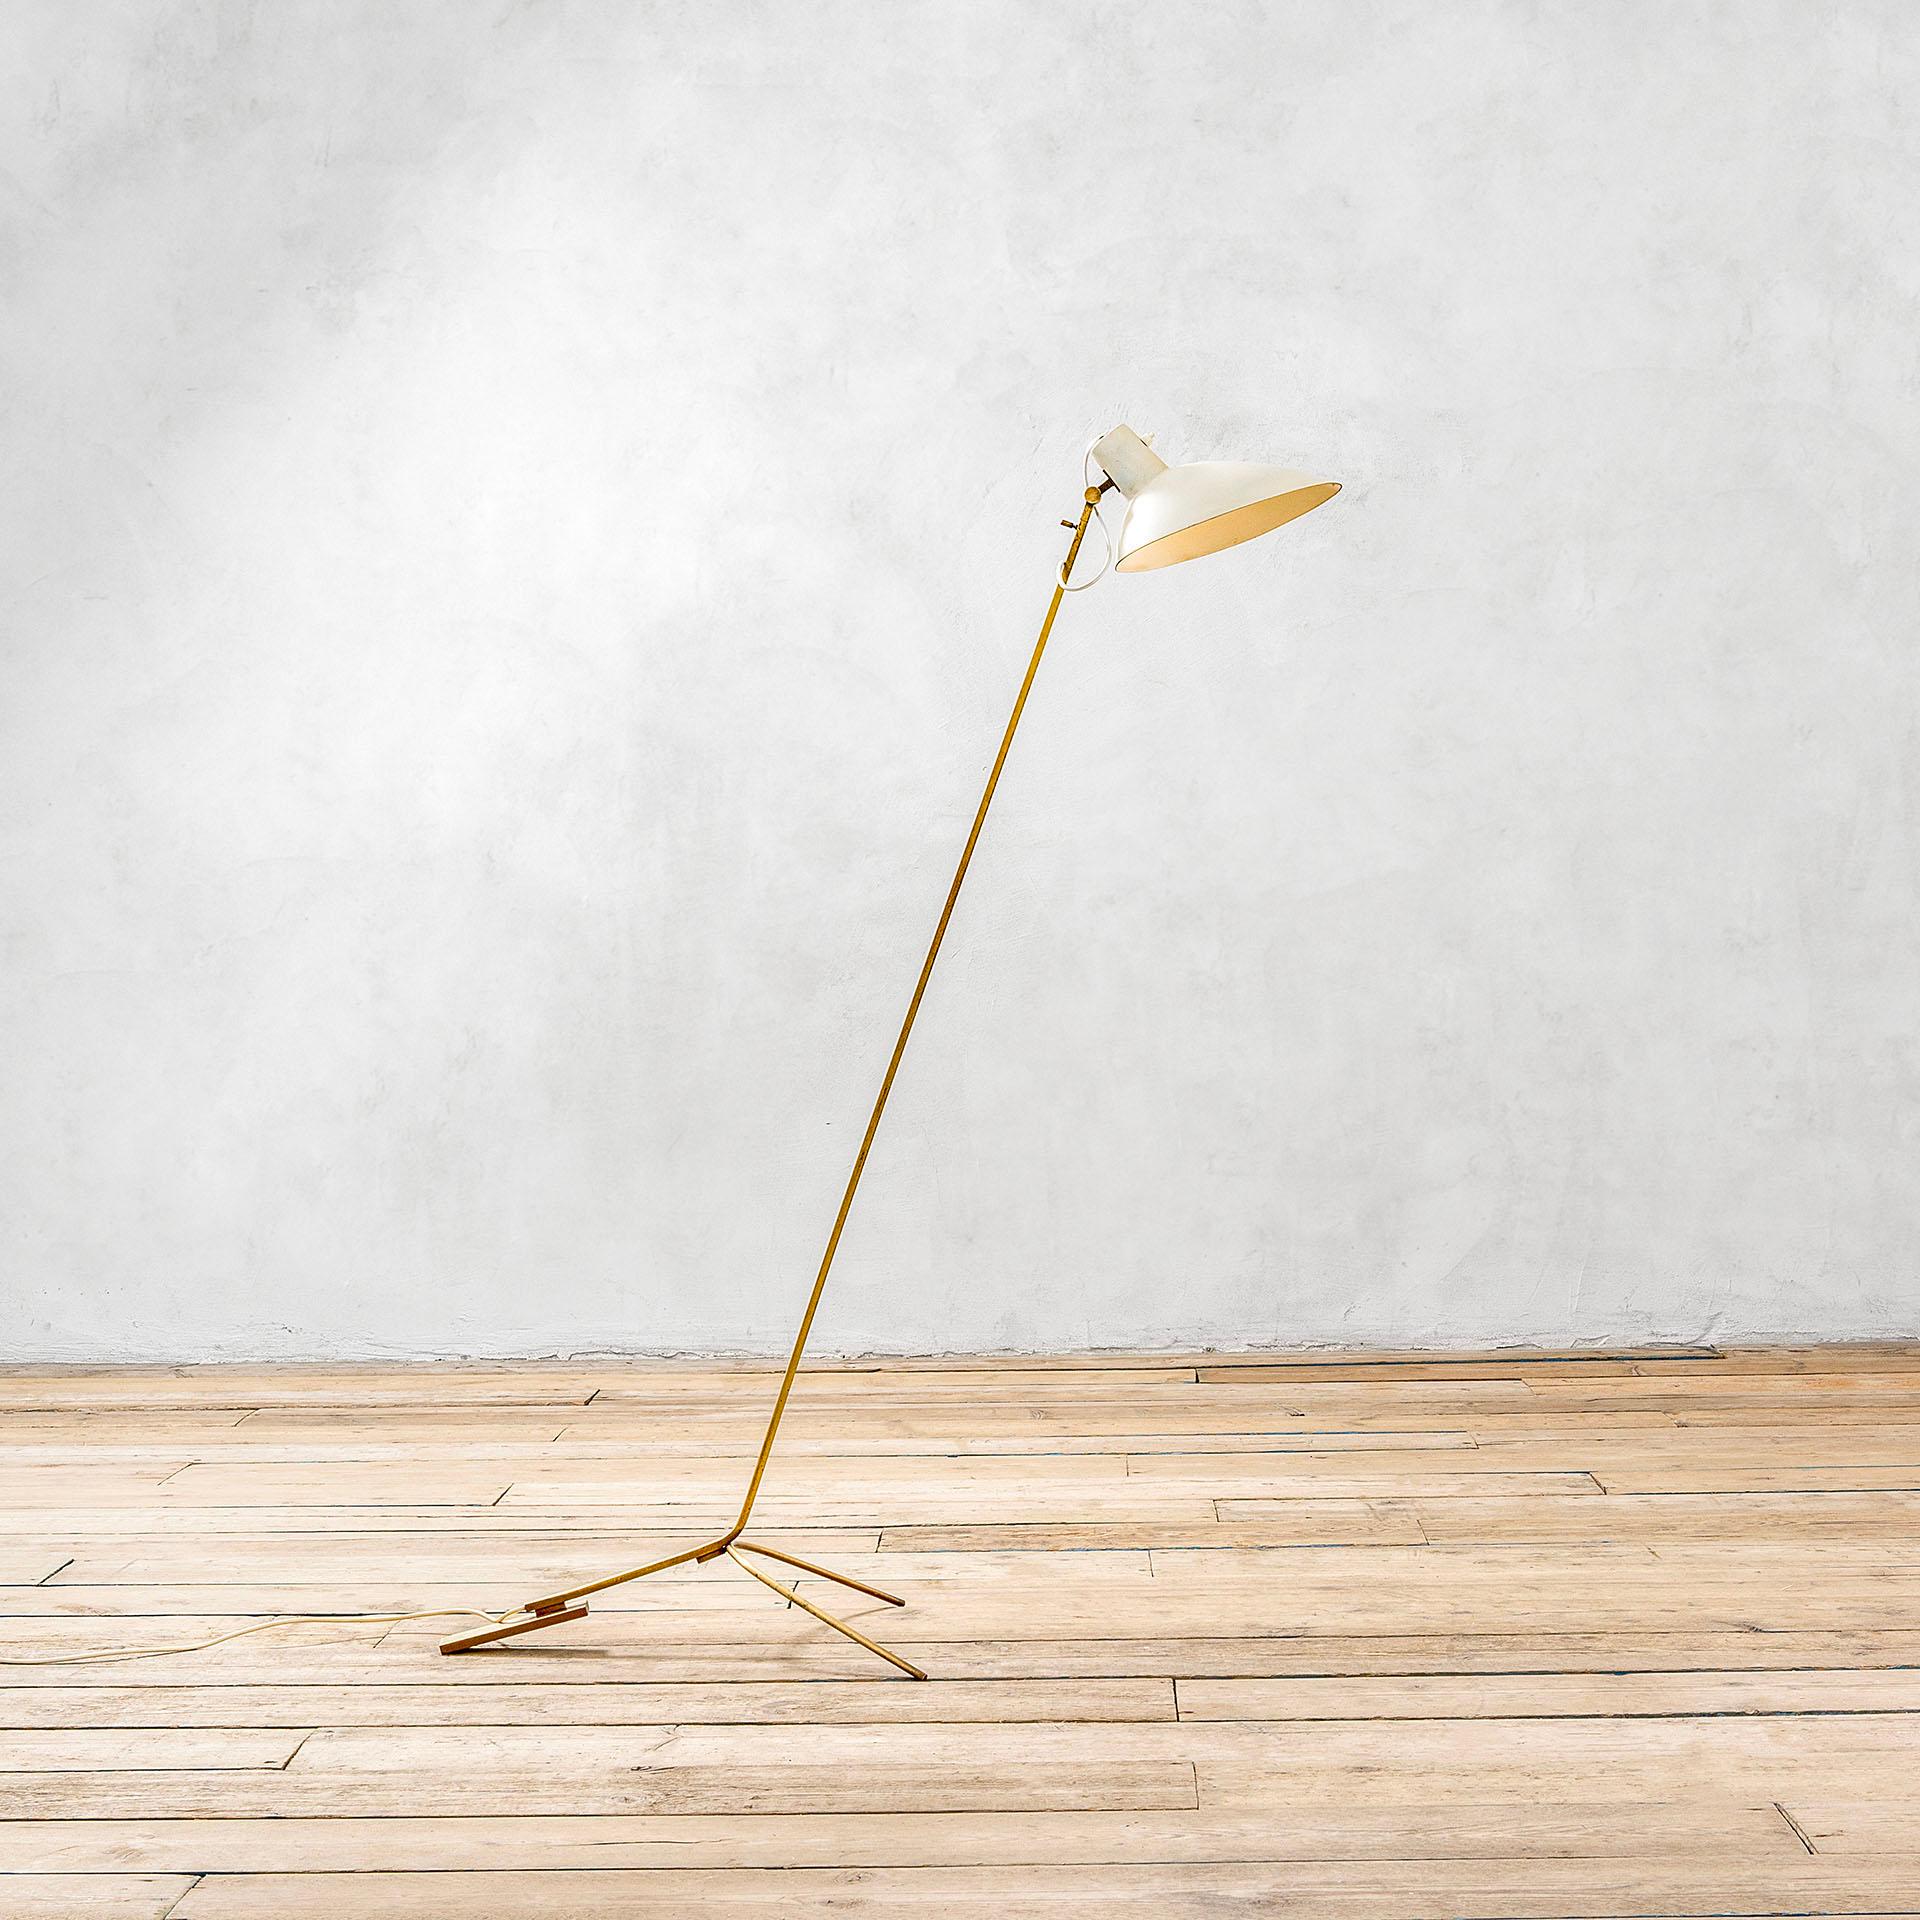 Mid-Century Modern 20th Century Vittoriano Viganò Floor Lamps Mod. 1047 for Arteluce, Early 50s For Sale